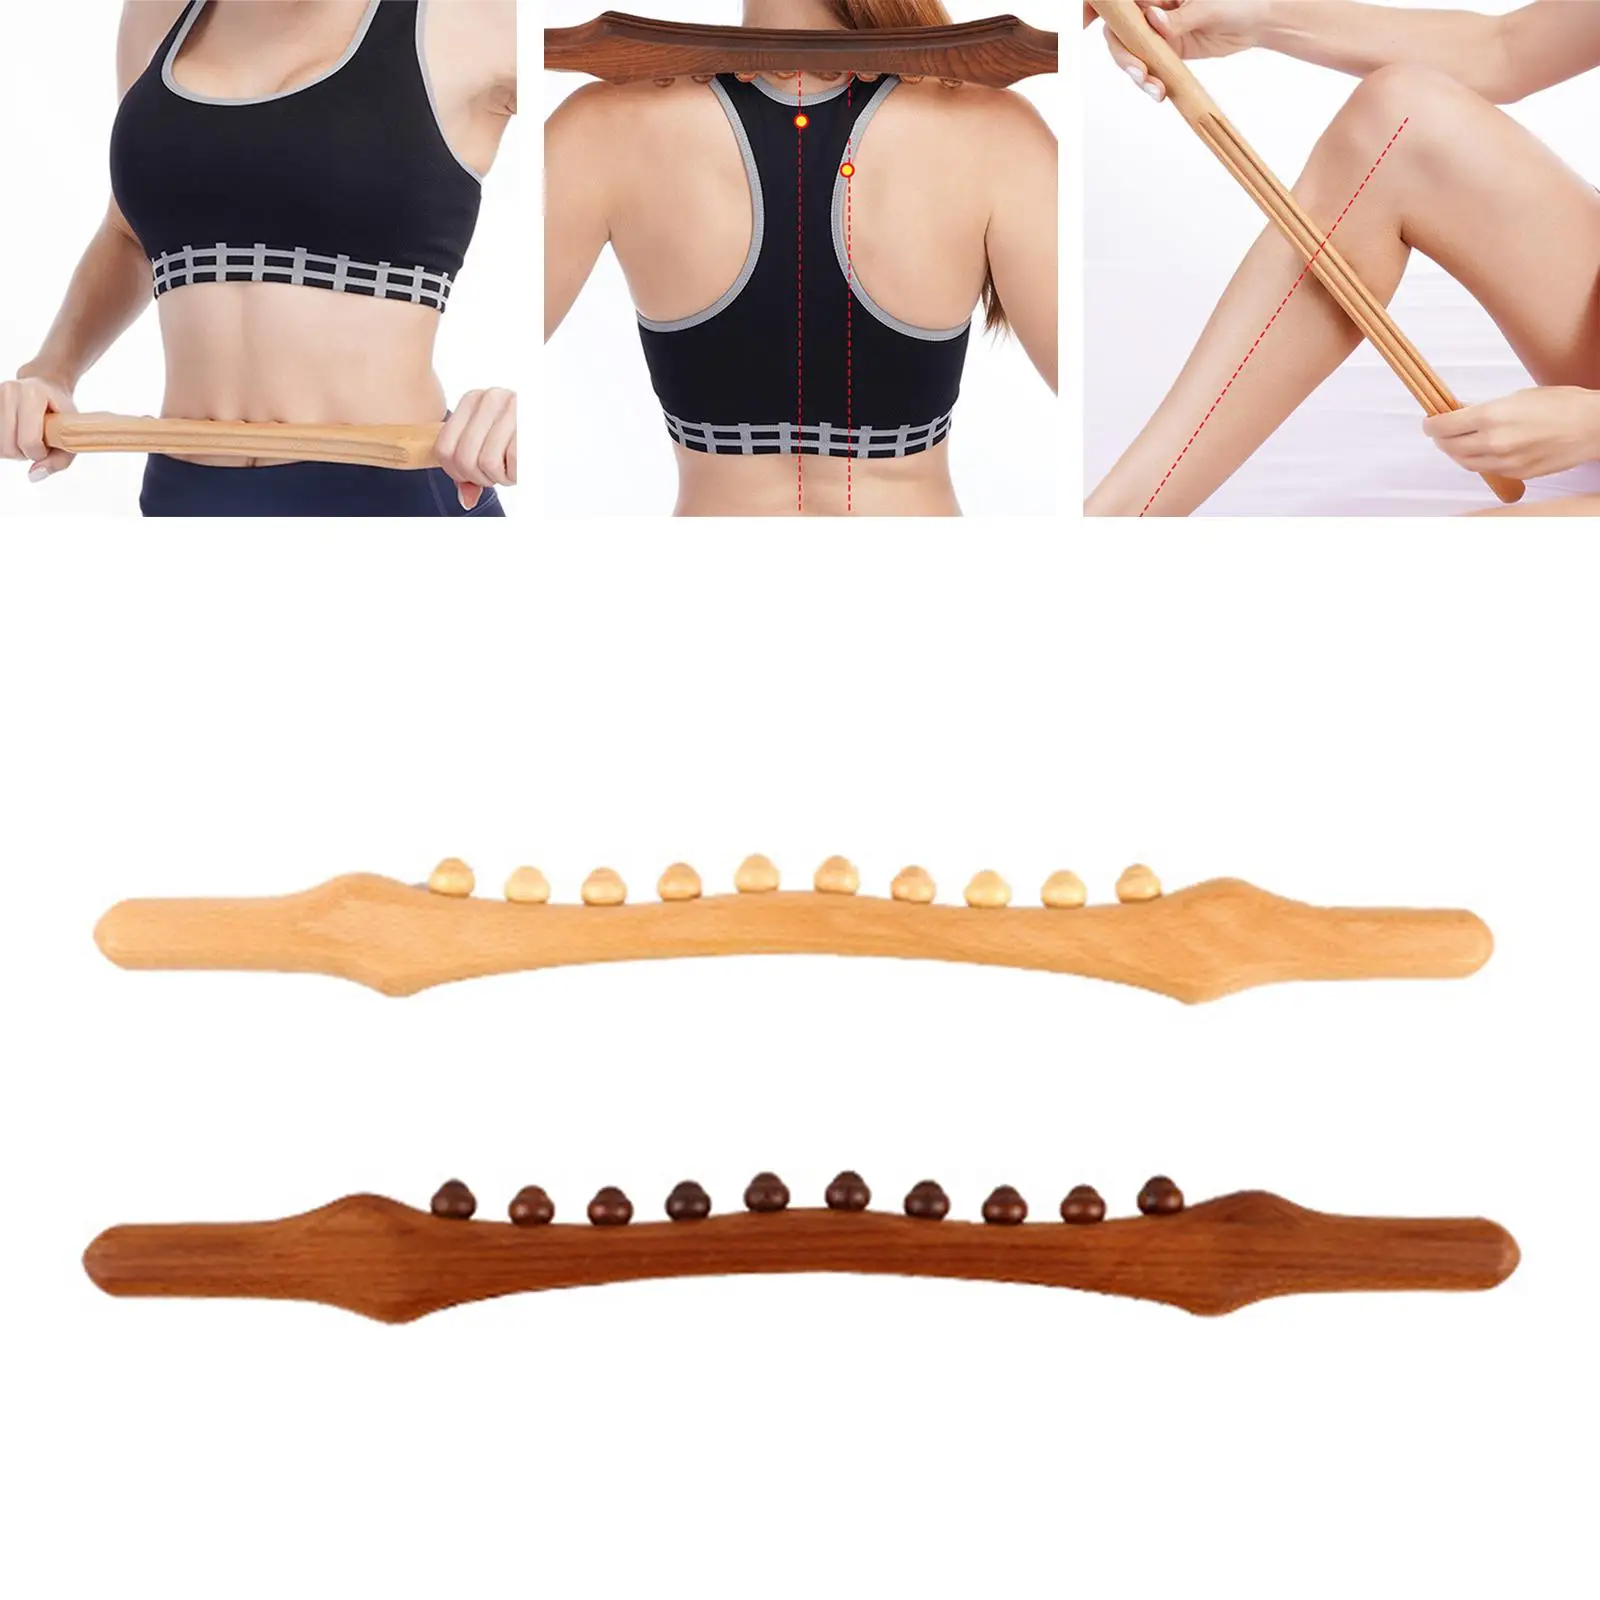 Wooden Guasha Scraping Stick Massage Tools 10 Beads Relaxing Lymphatic Drainage Tool for Back